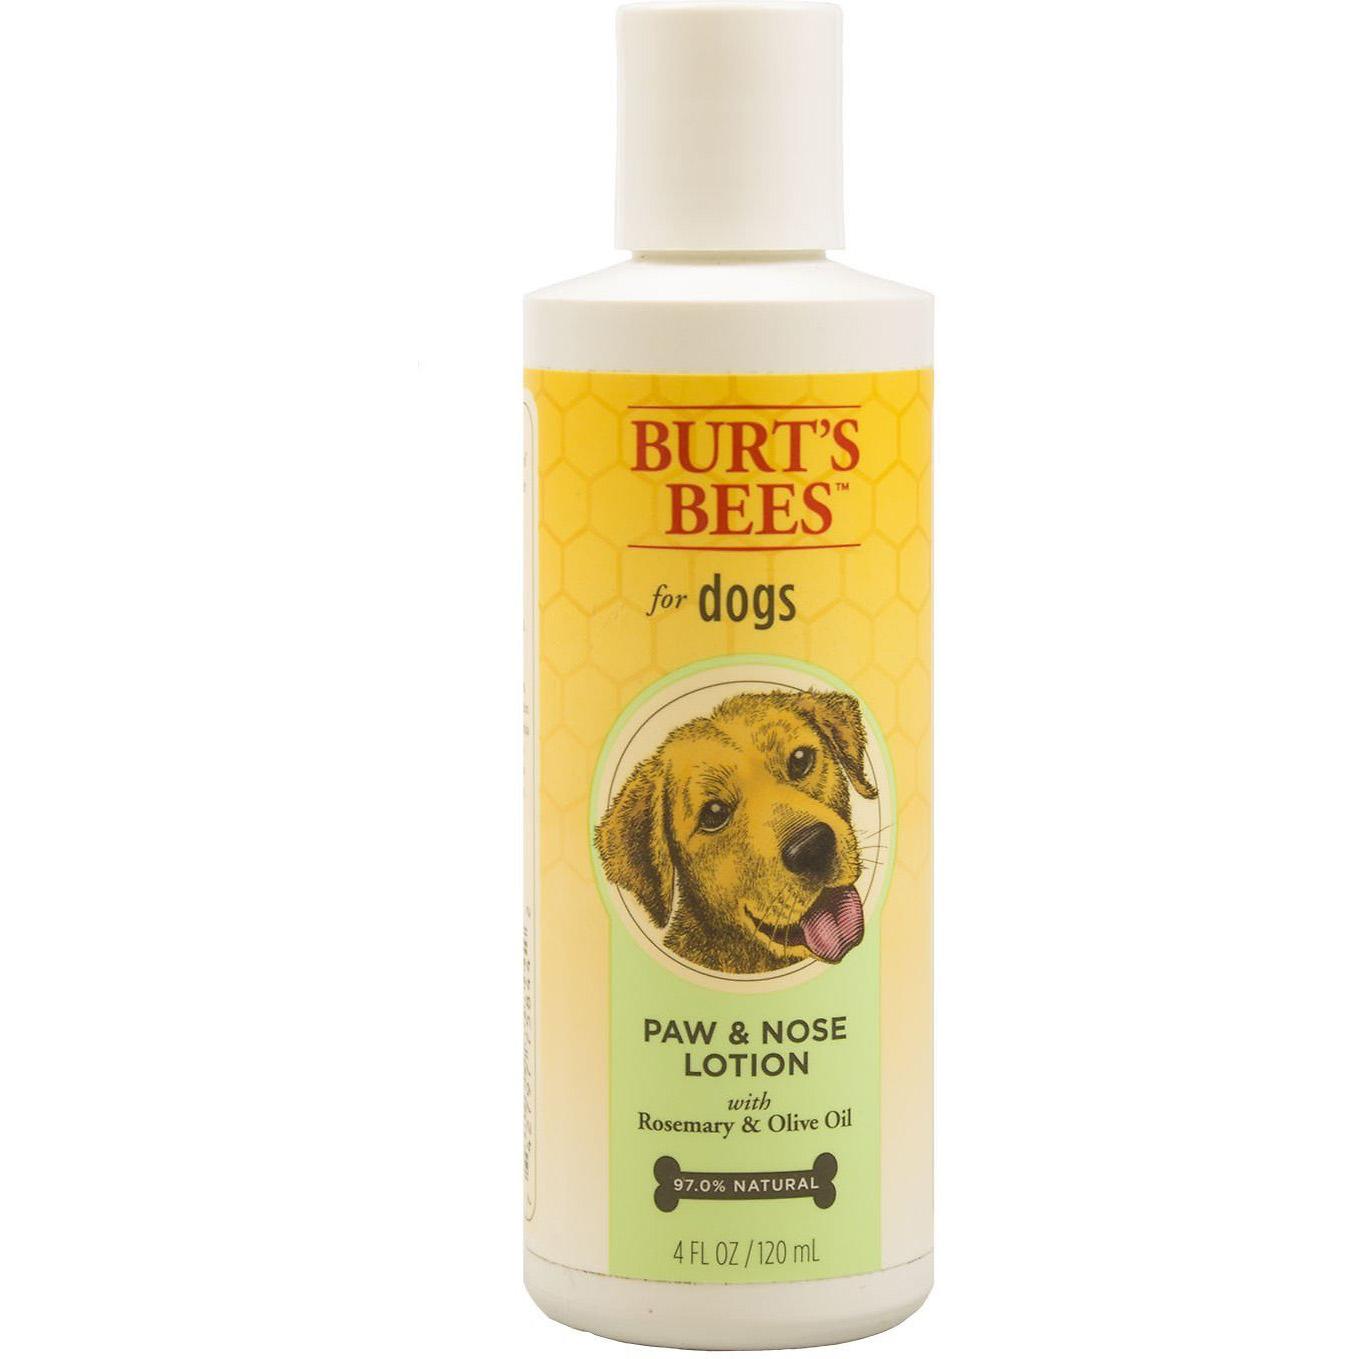 Burts Bees for Dogs All-Natural Paw and Nose Lotion for $2.28